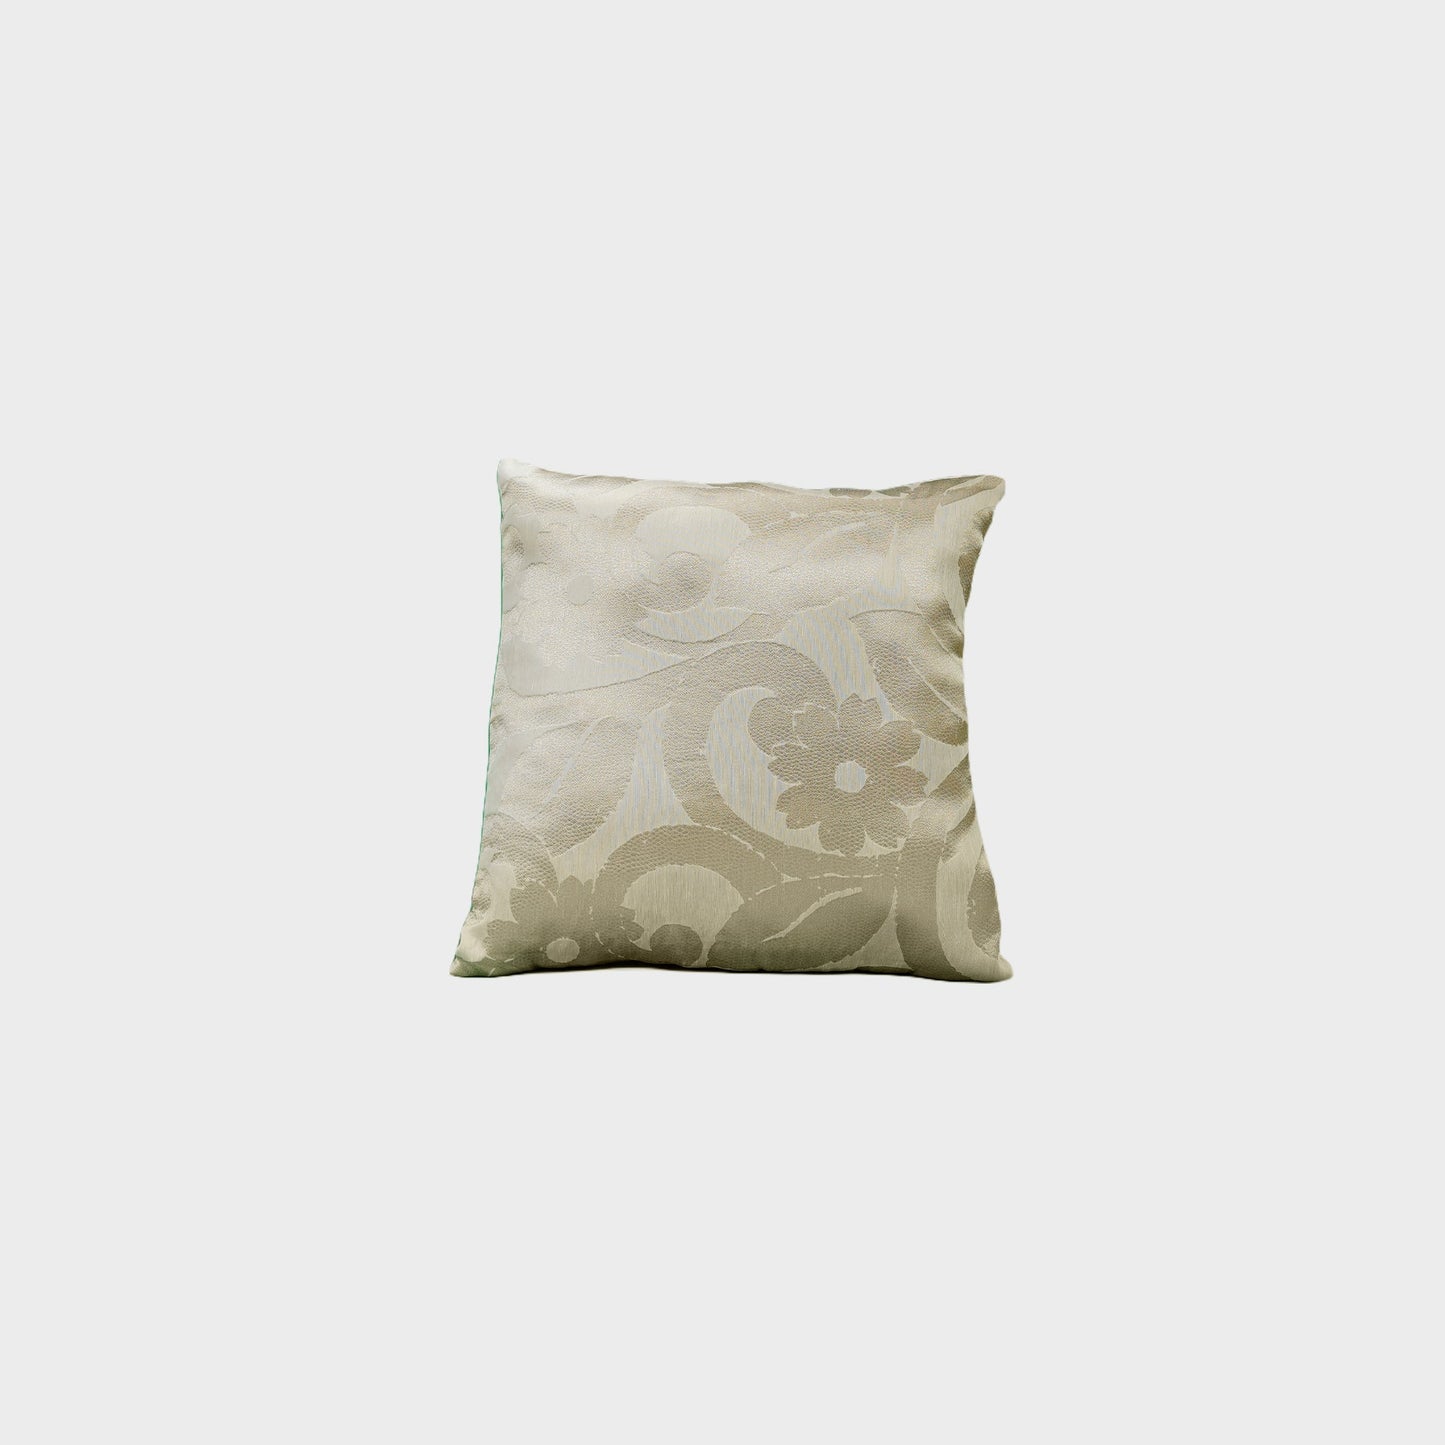 Embossed Ivory Cushion Cover Sets at Kamakhyaa by Aetherea. This item is Cotton, Cushion covers, Embossed, Flower, Home, ivory, Upcycled